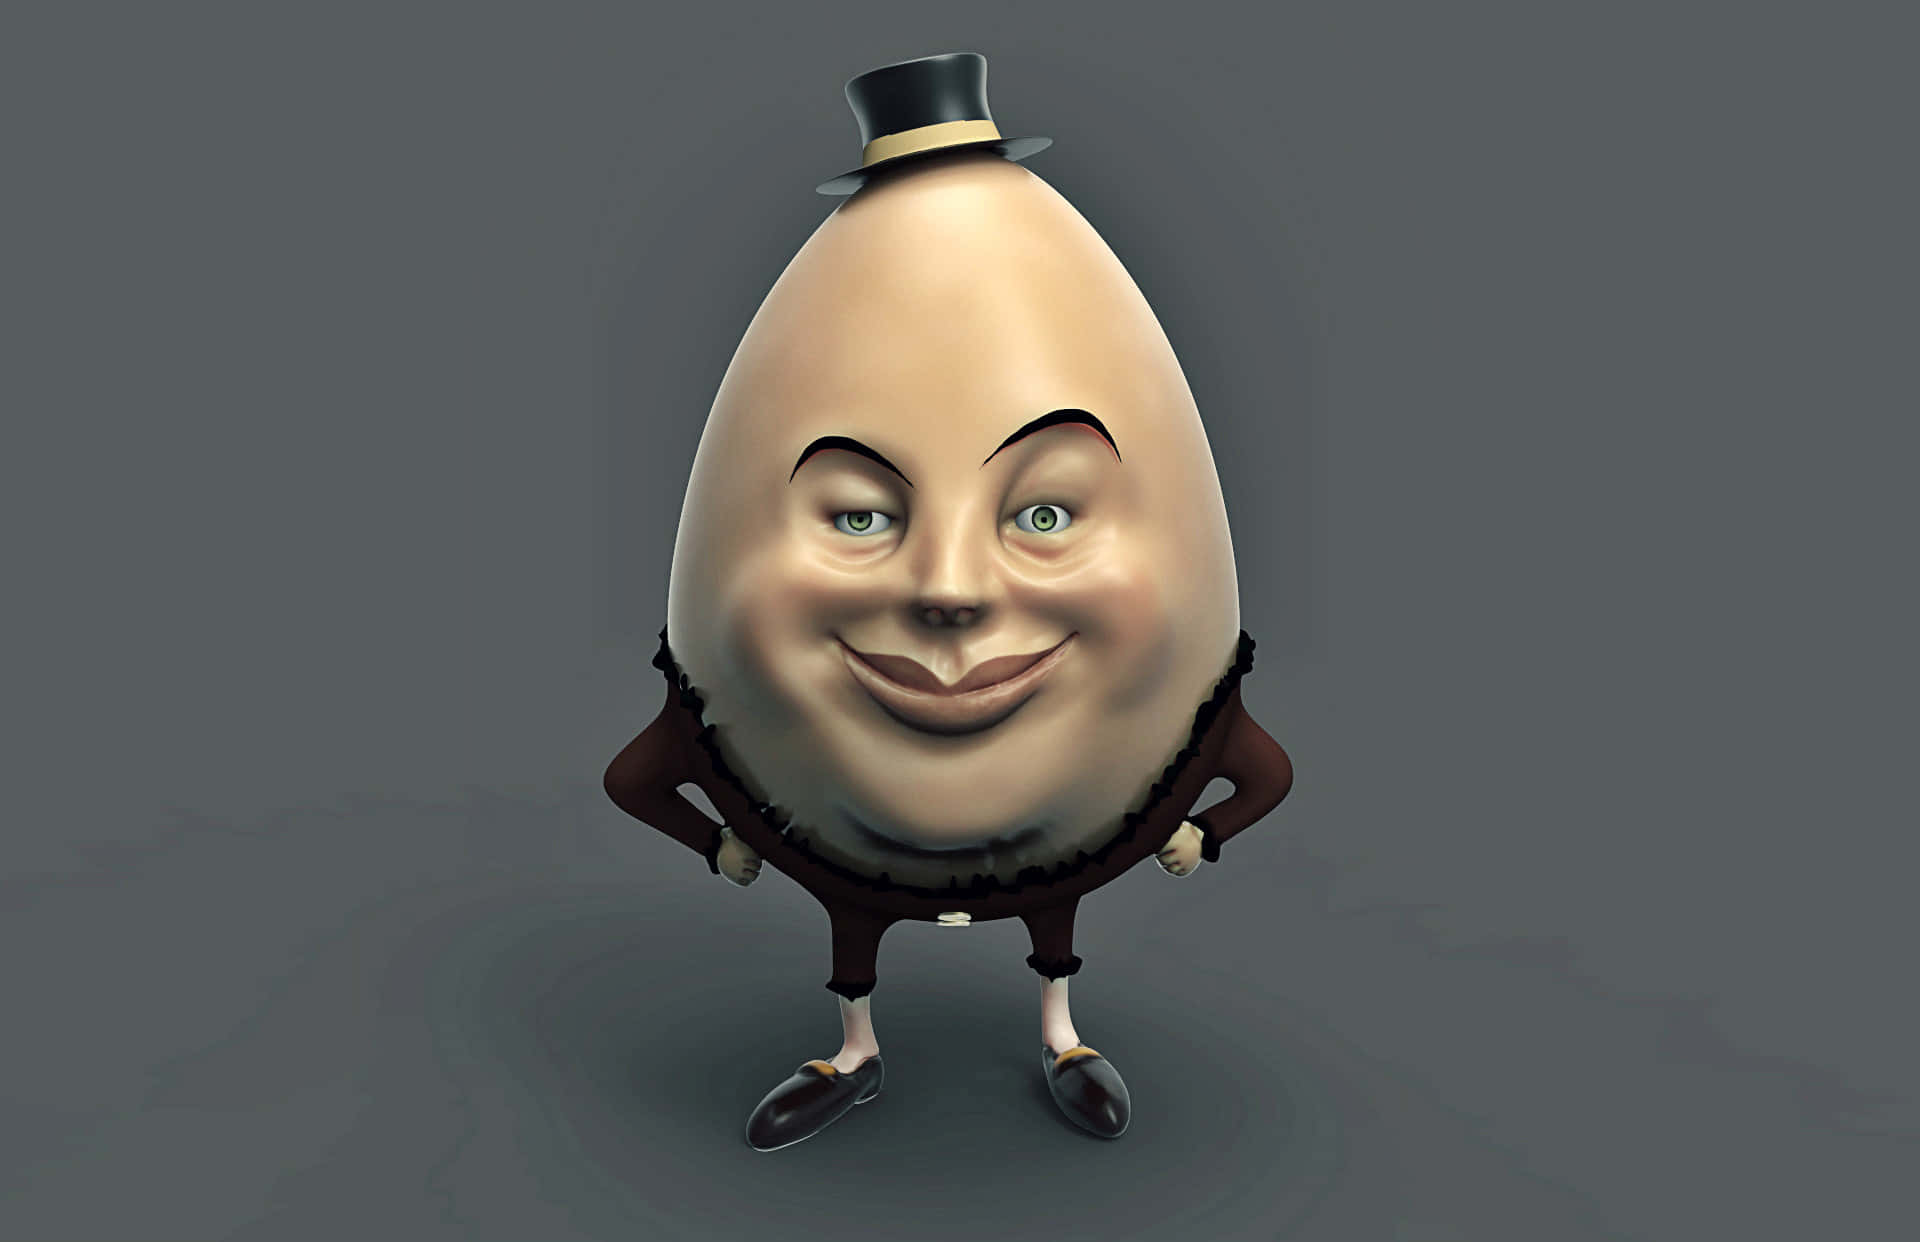 A Flawless Illustration of the Iconic character Humpty Dumpty